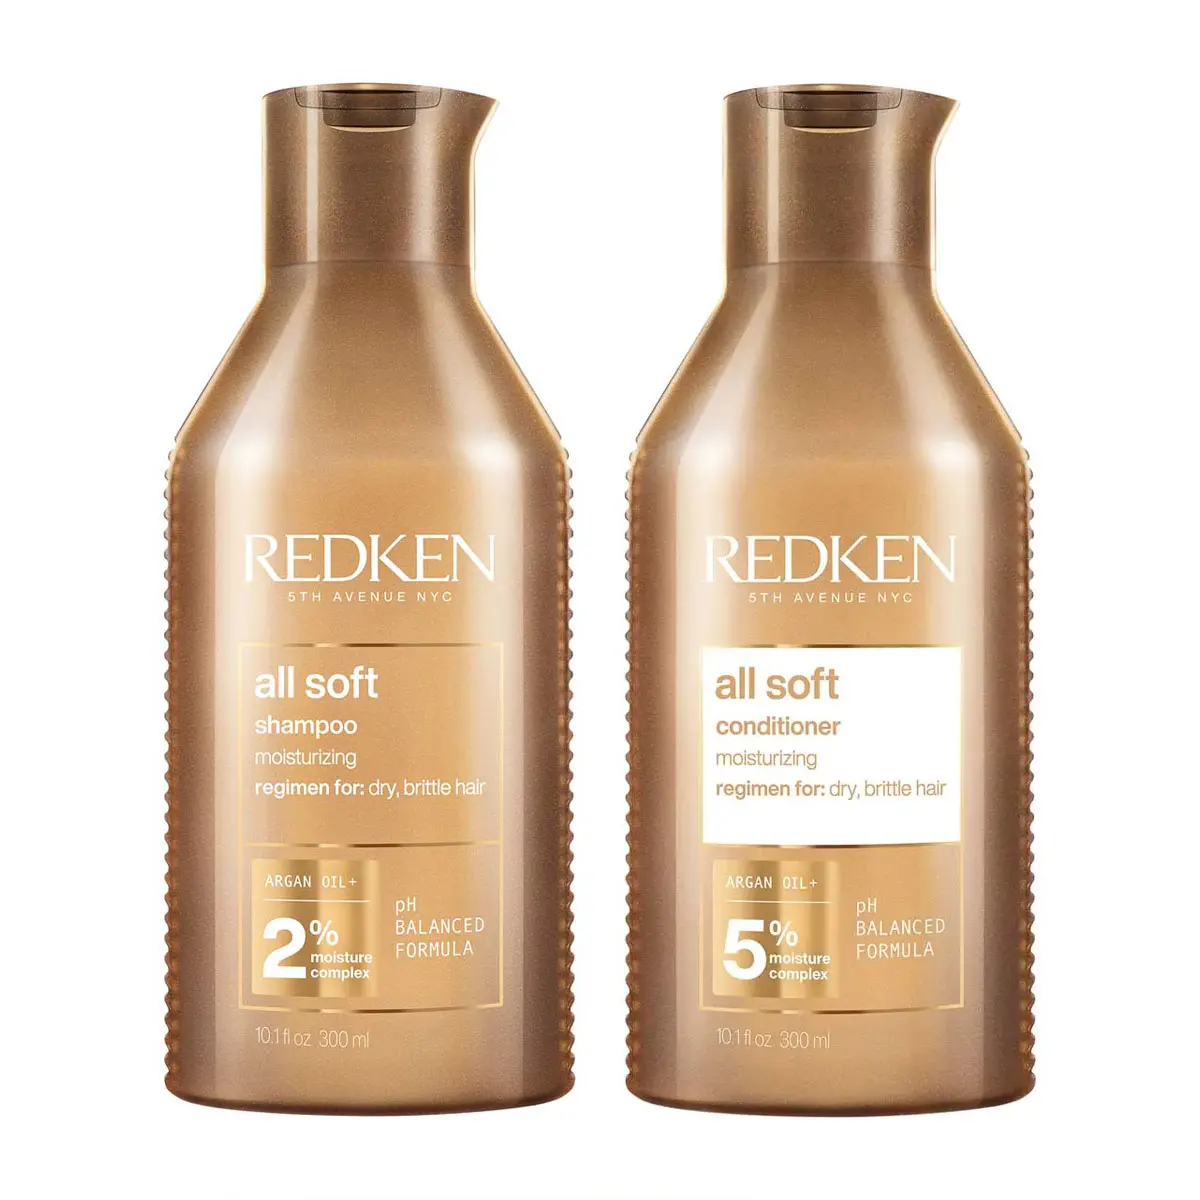 Redken All Soft Shampoo & Conditioner 300ml Duo Discounts and Cashback